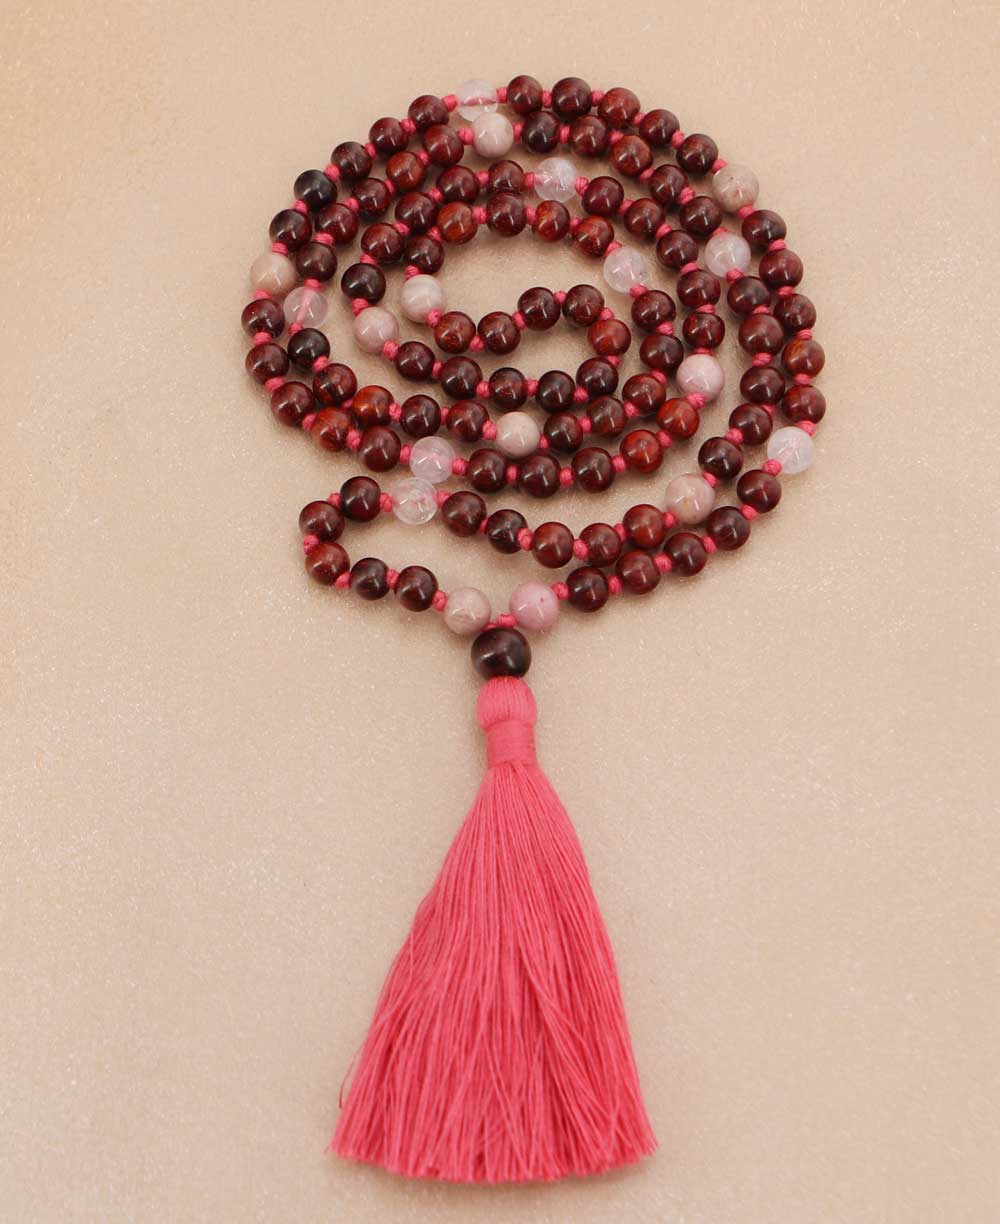 Love and Compassion Rosewood Meditation Mala With Rose Quartz and Rhodonite - Prayer Beads